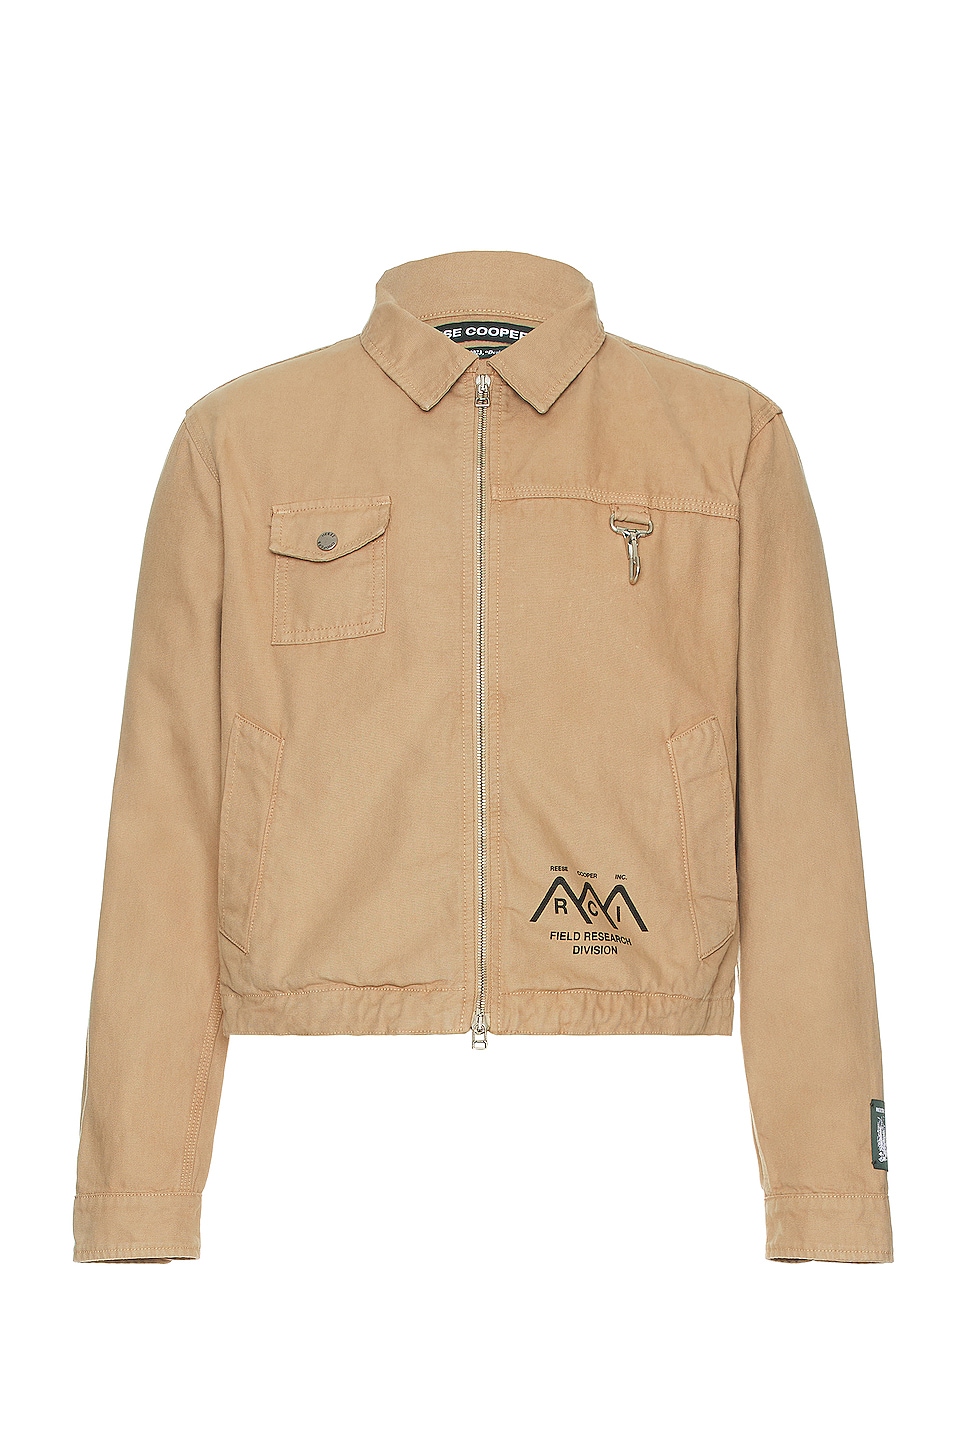 Research Division Garment Dyed Work Jacket in Beige